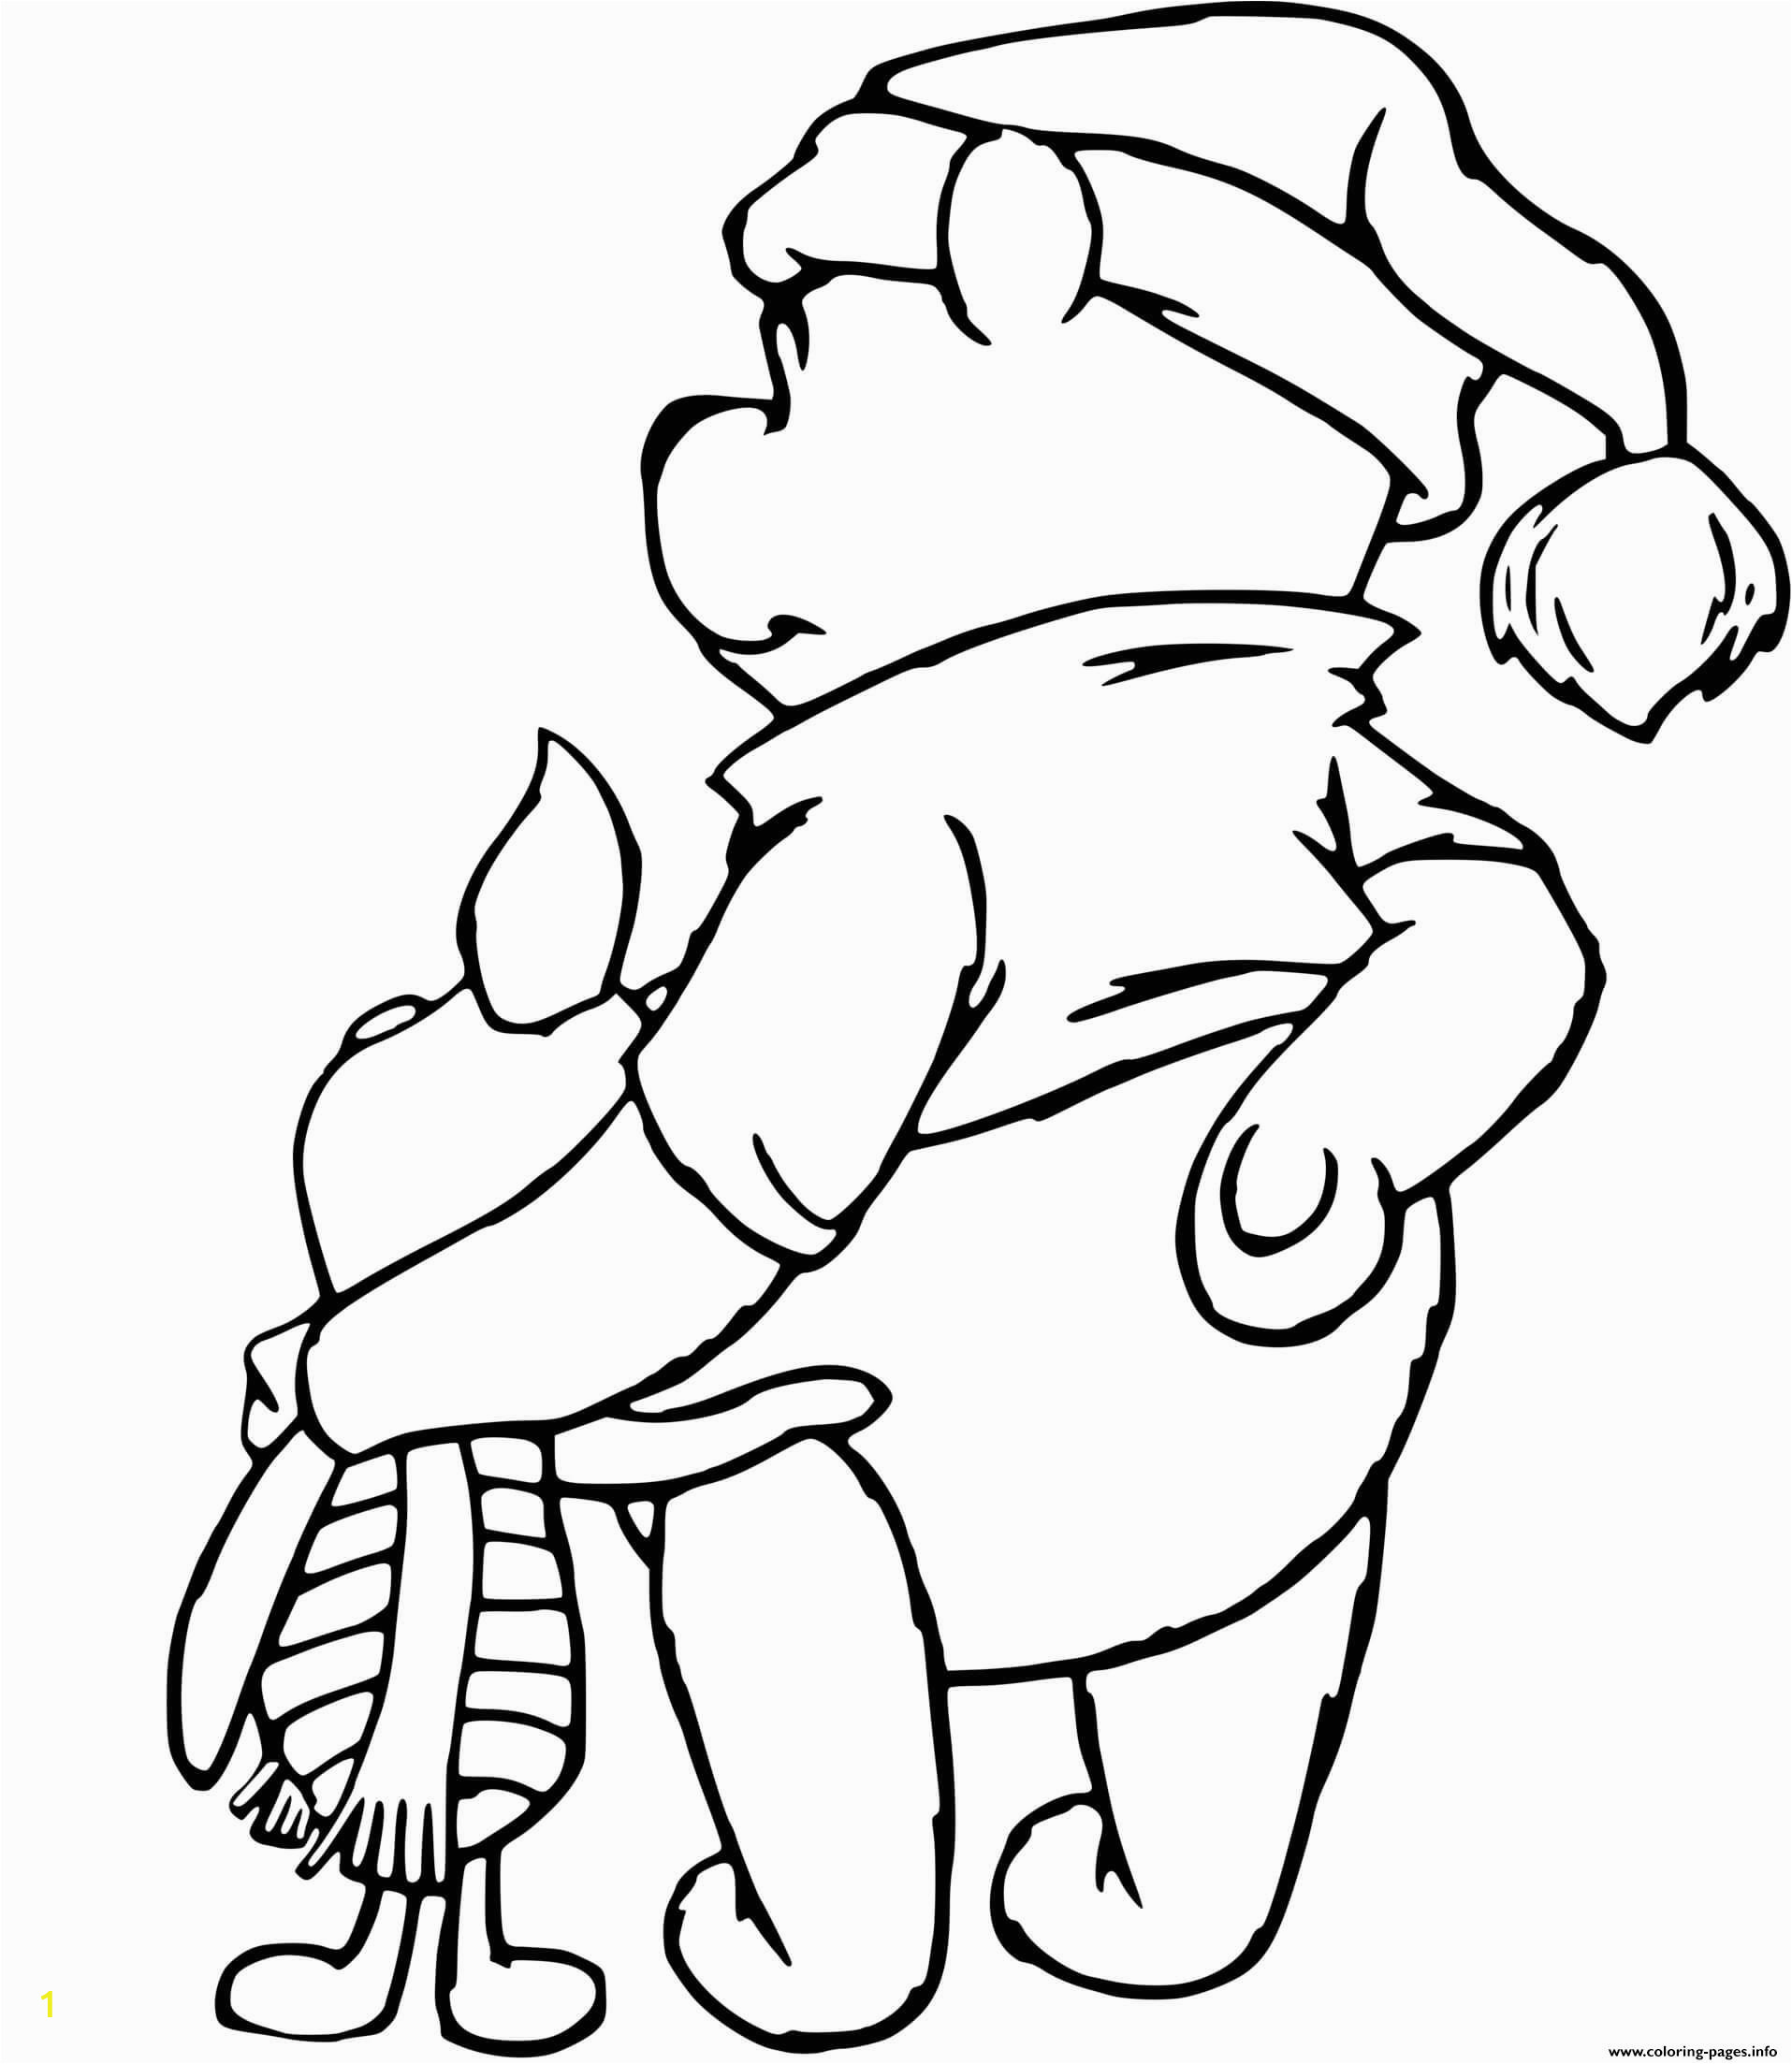 Piglet From Winnie the Pooh Coloring Pages Winnie the Pooh Piglet Back View Coloring Pages Printable